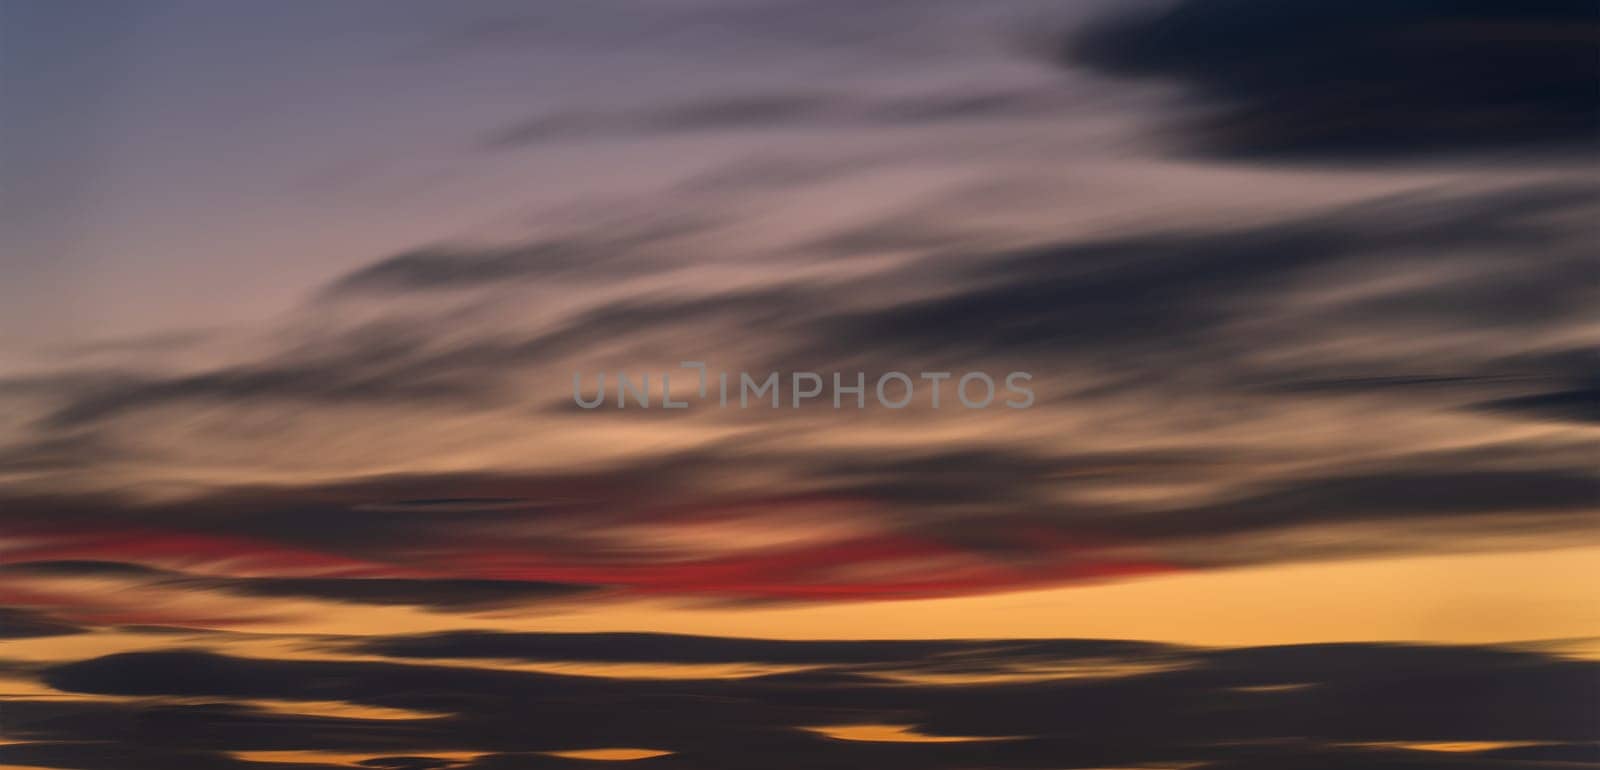 Stunning long-exposure photo of a sunset sky transitioning from blue to orange, perfect for backgrounds with text space.